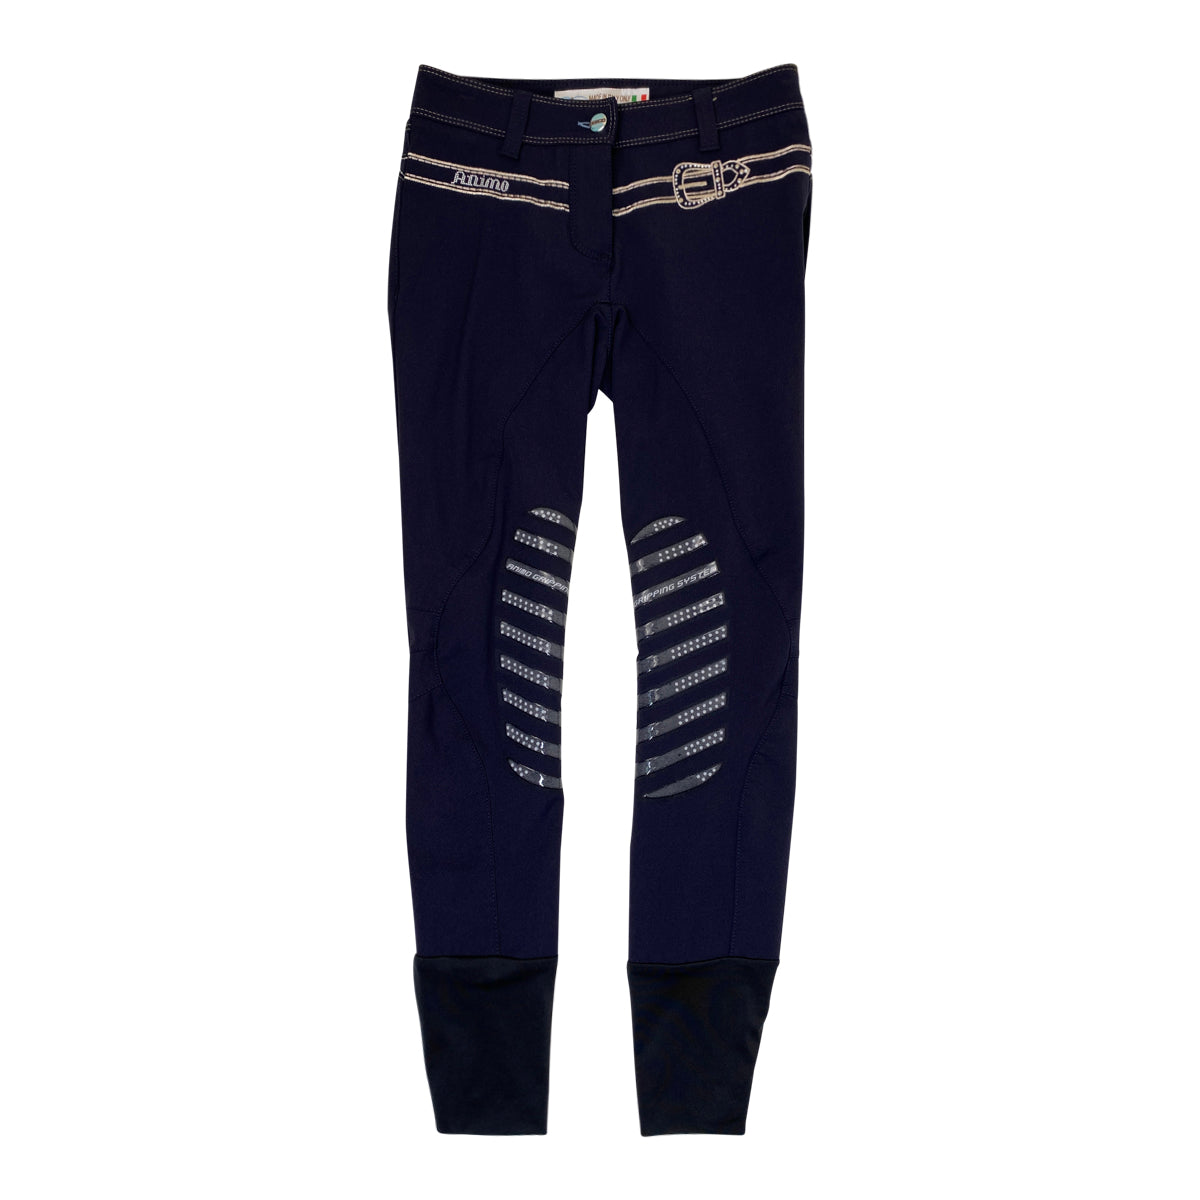 Animo 'Nababbo' Knee Patch Breeches in Navy/Tan